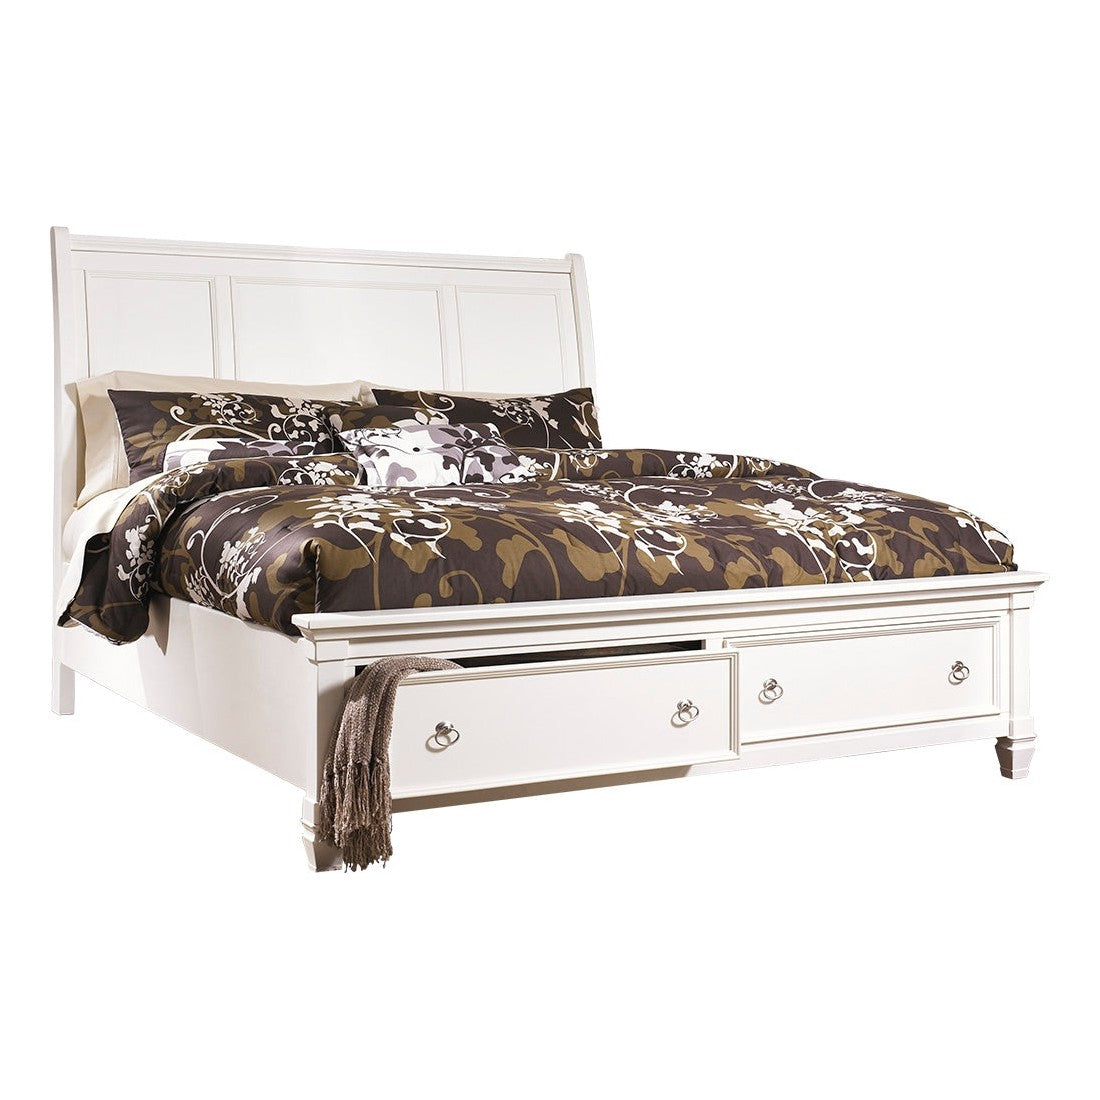 Prentice Sleigh Bed with 2 Storage Drawers Ash-B672B15